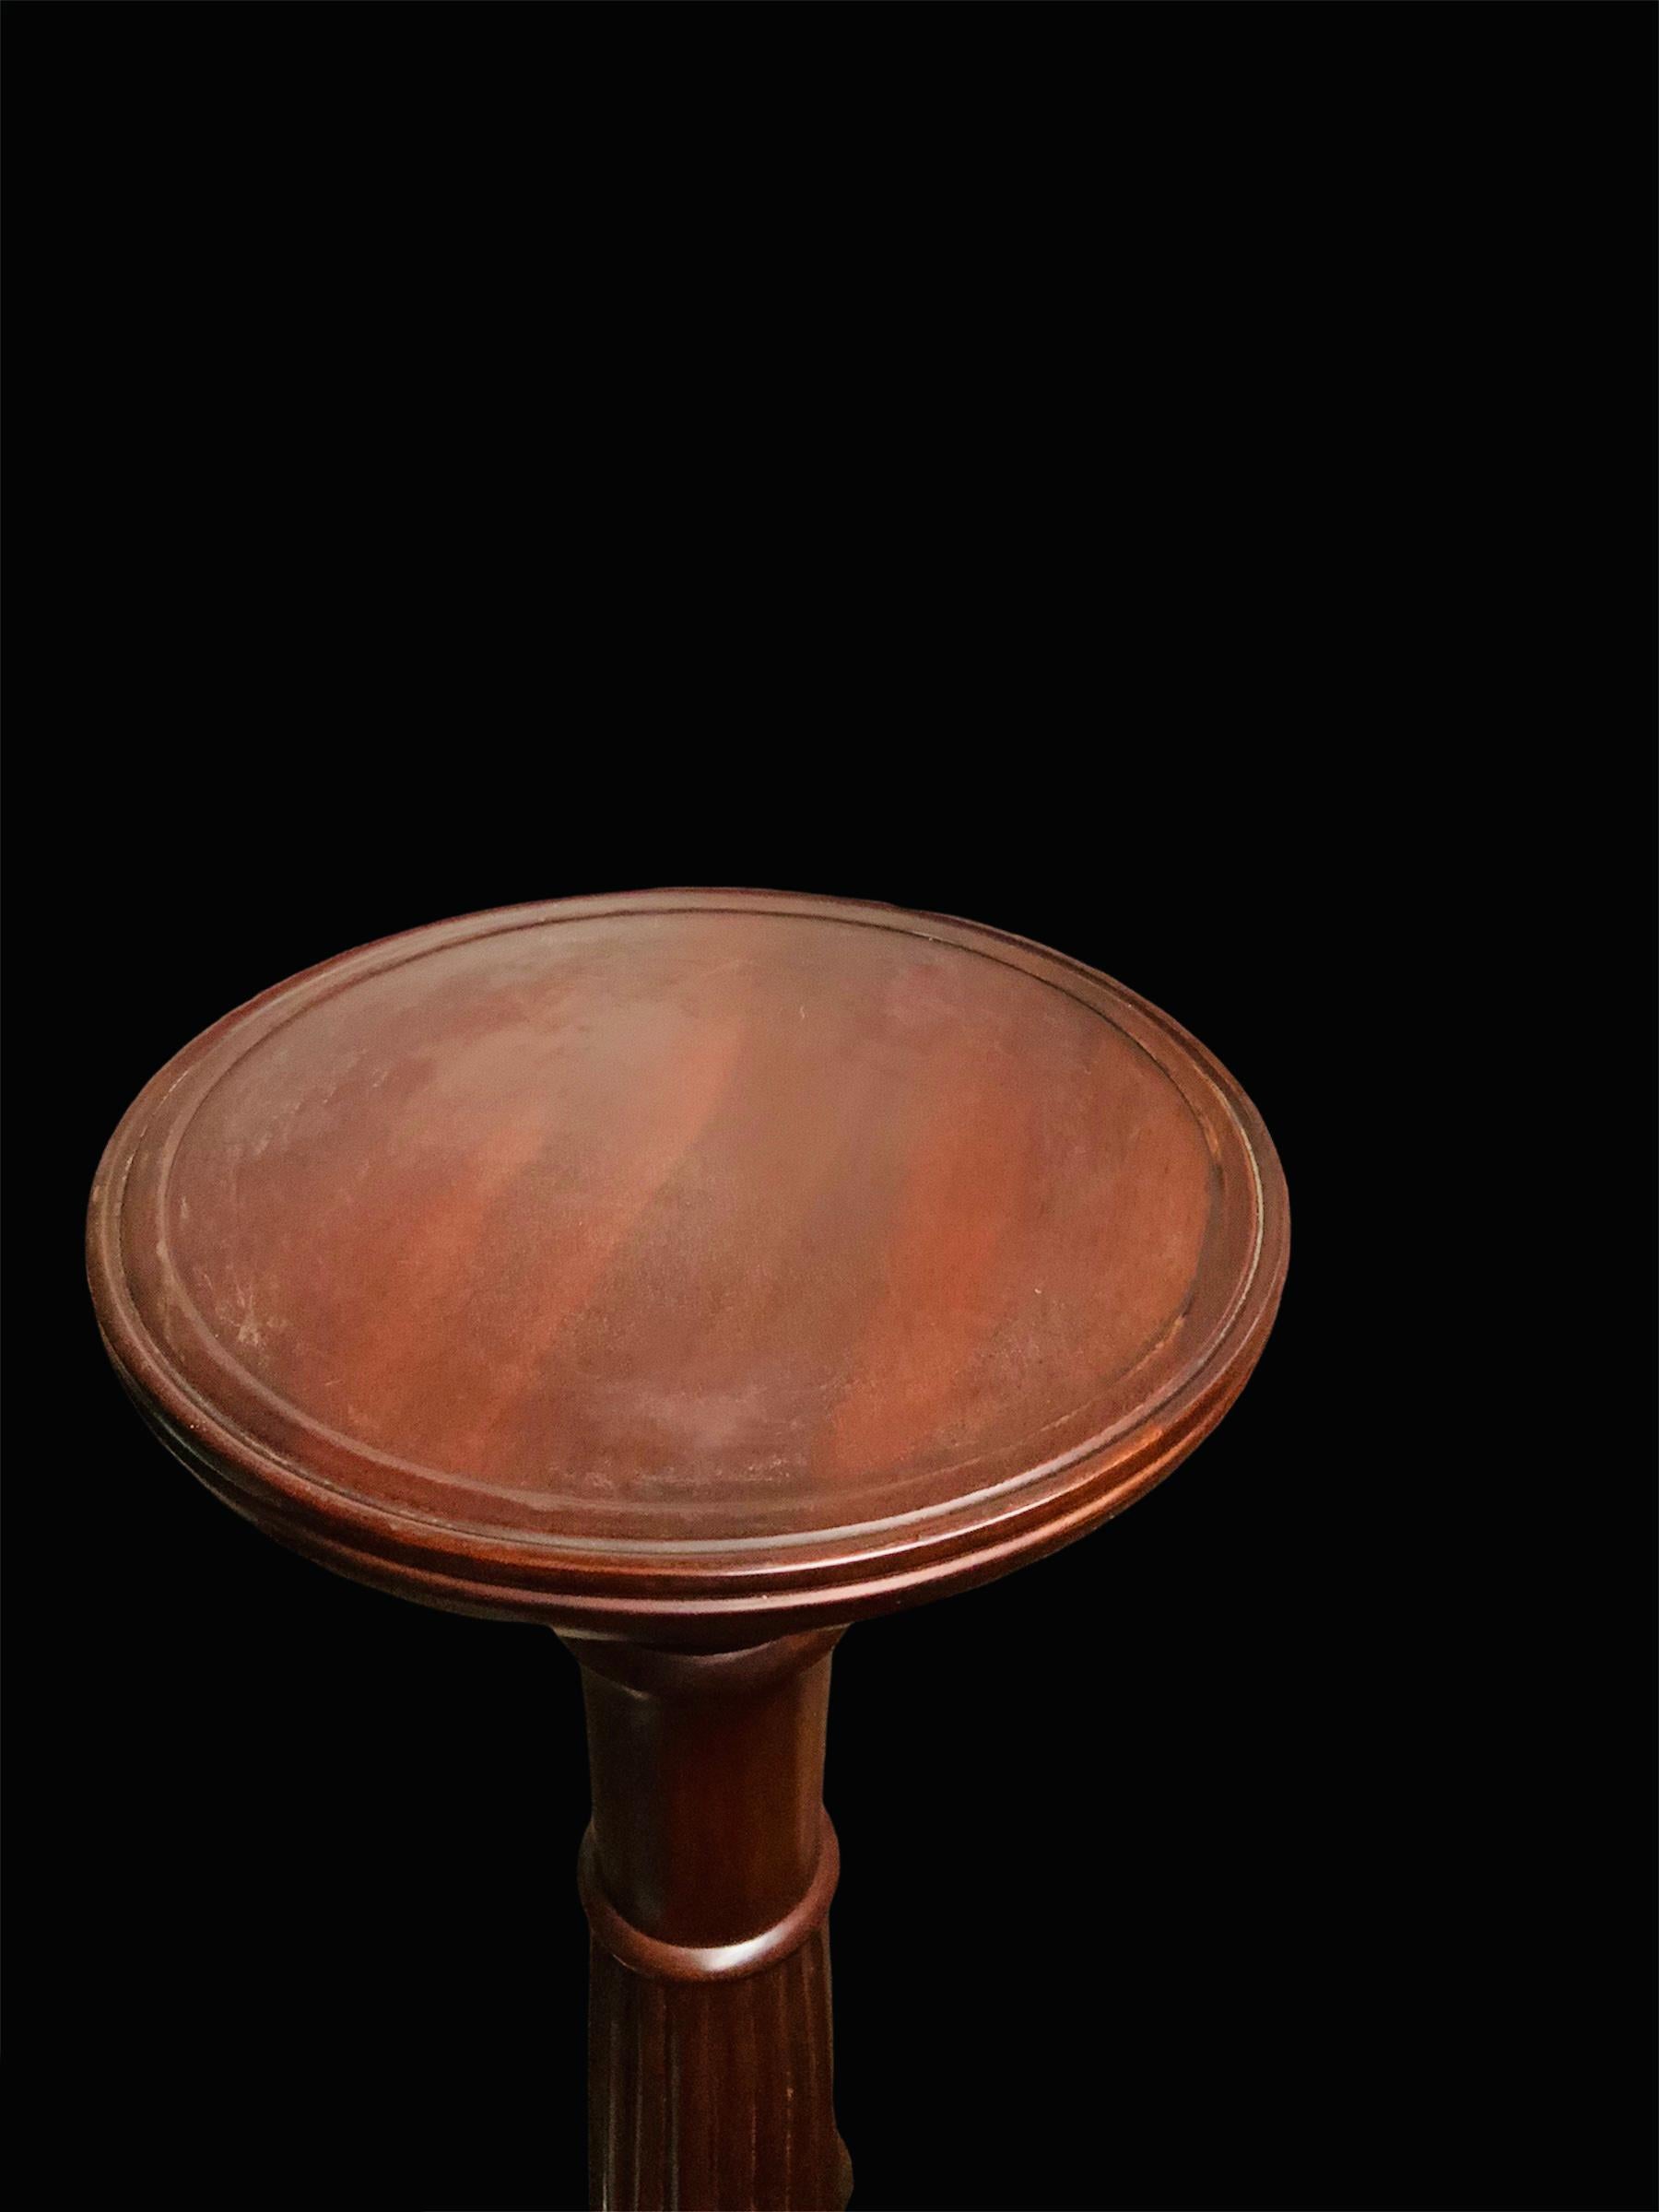 This is a very tall and heavy carved dark solid wood pedestal/torchere/plant stand. It depicts a round top attached to a wide column that is reeded in the center and adorned with the carving of a scalloped petals bud flower with large leaves at the